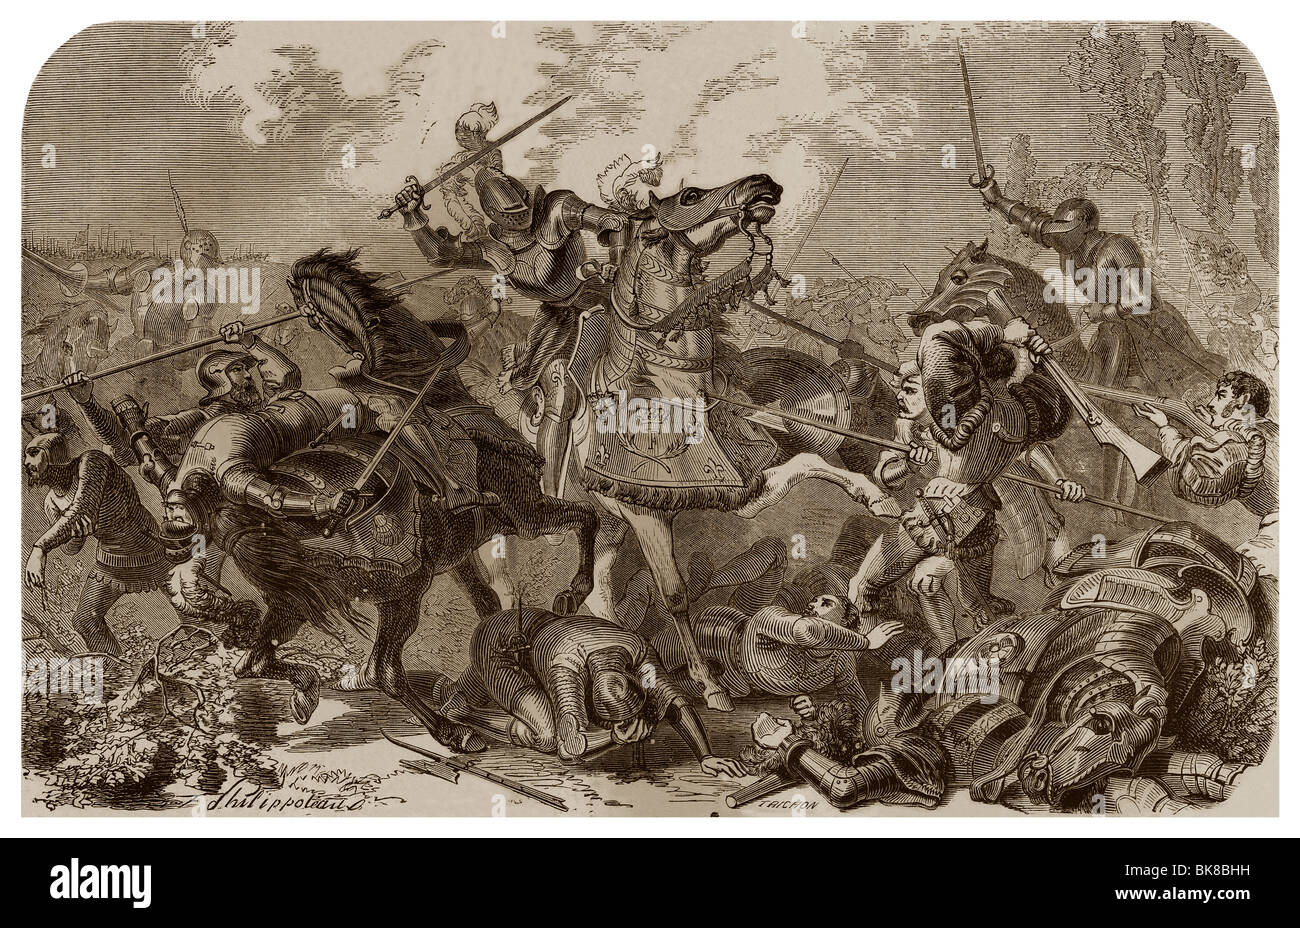 On 24th February 1525, as part of the Sixth Italian War, battle of Pavia. Stock Photo